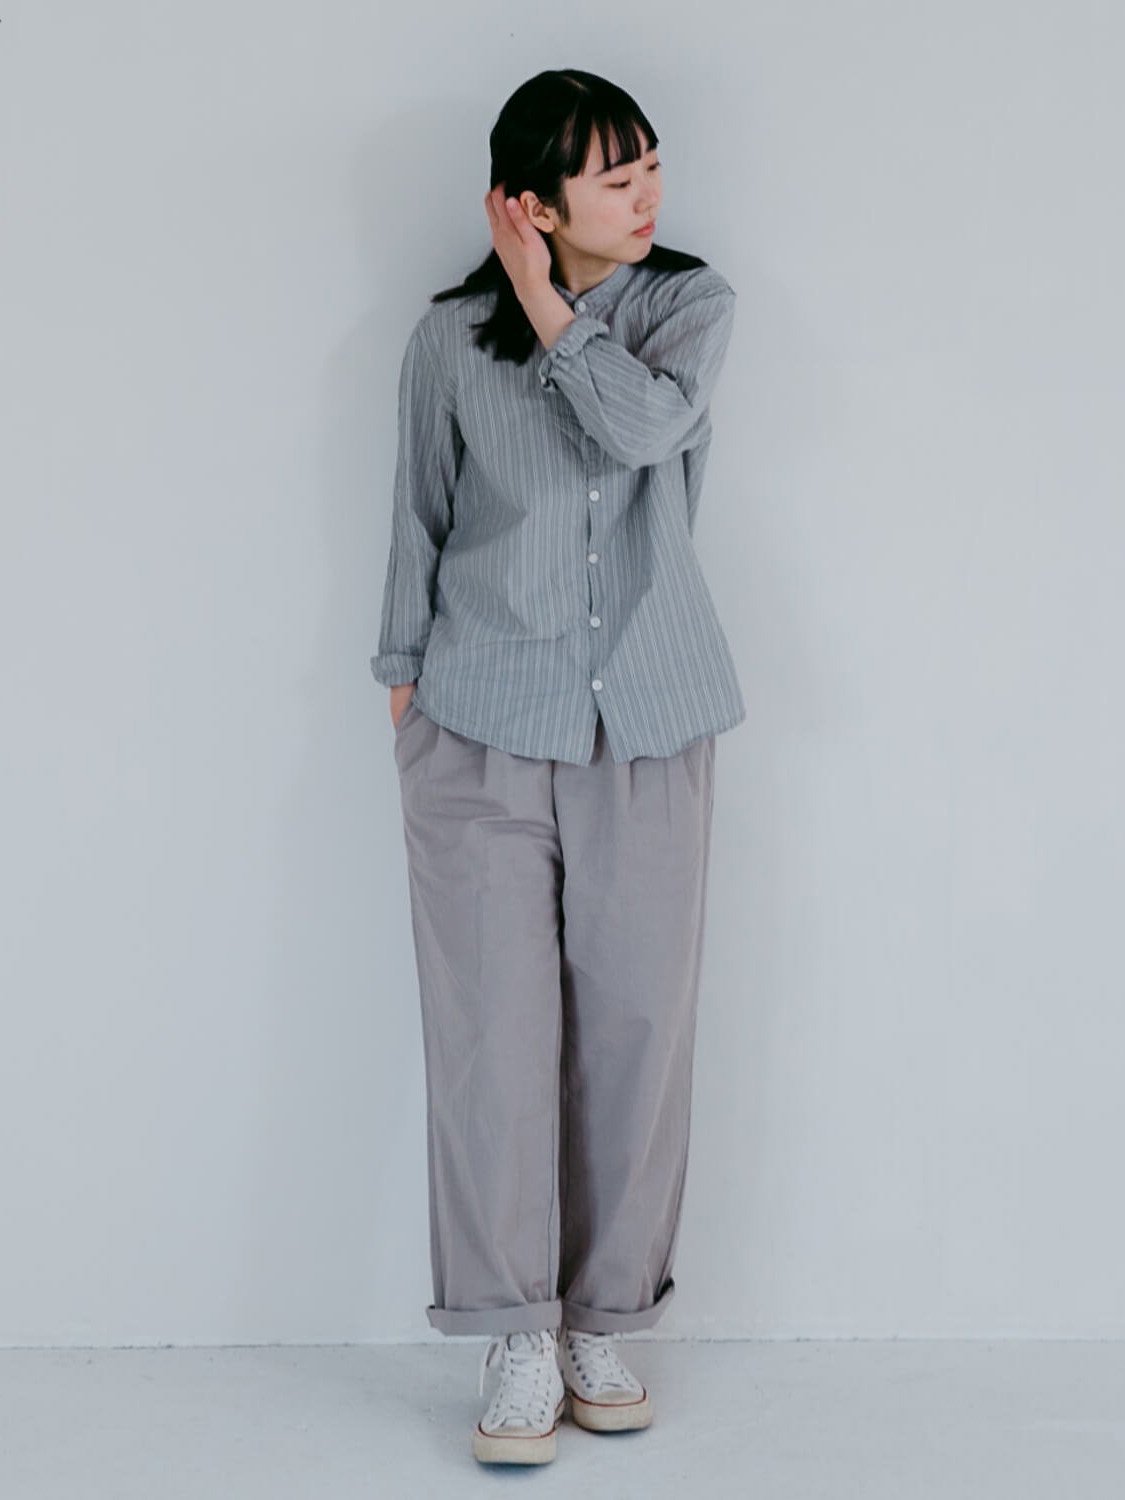 Atelier shirts relax stand collar Gray stripe